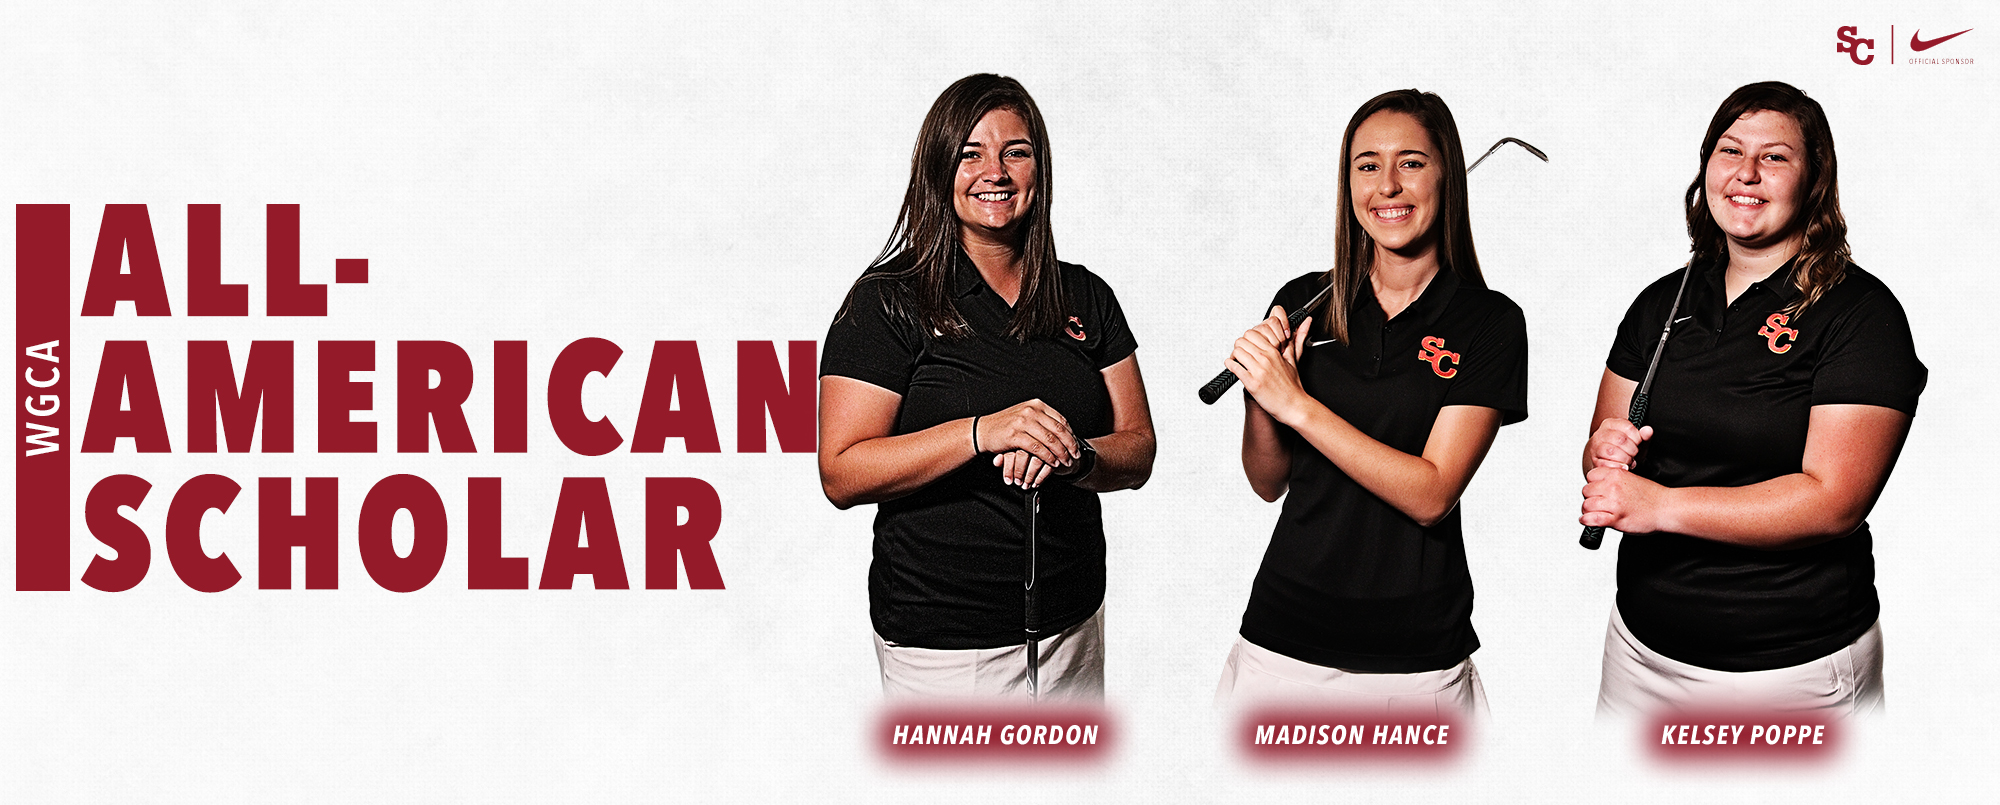 Hannah Gordon, Madison Hance and Kelsey Poppe earned All-American Scholar honors from the WGCA for the 2018-19 season.